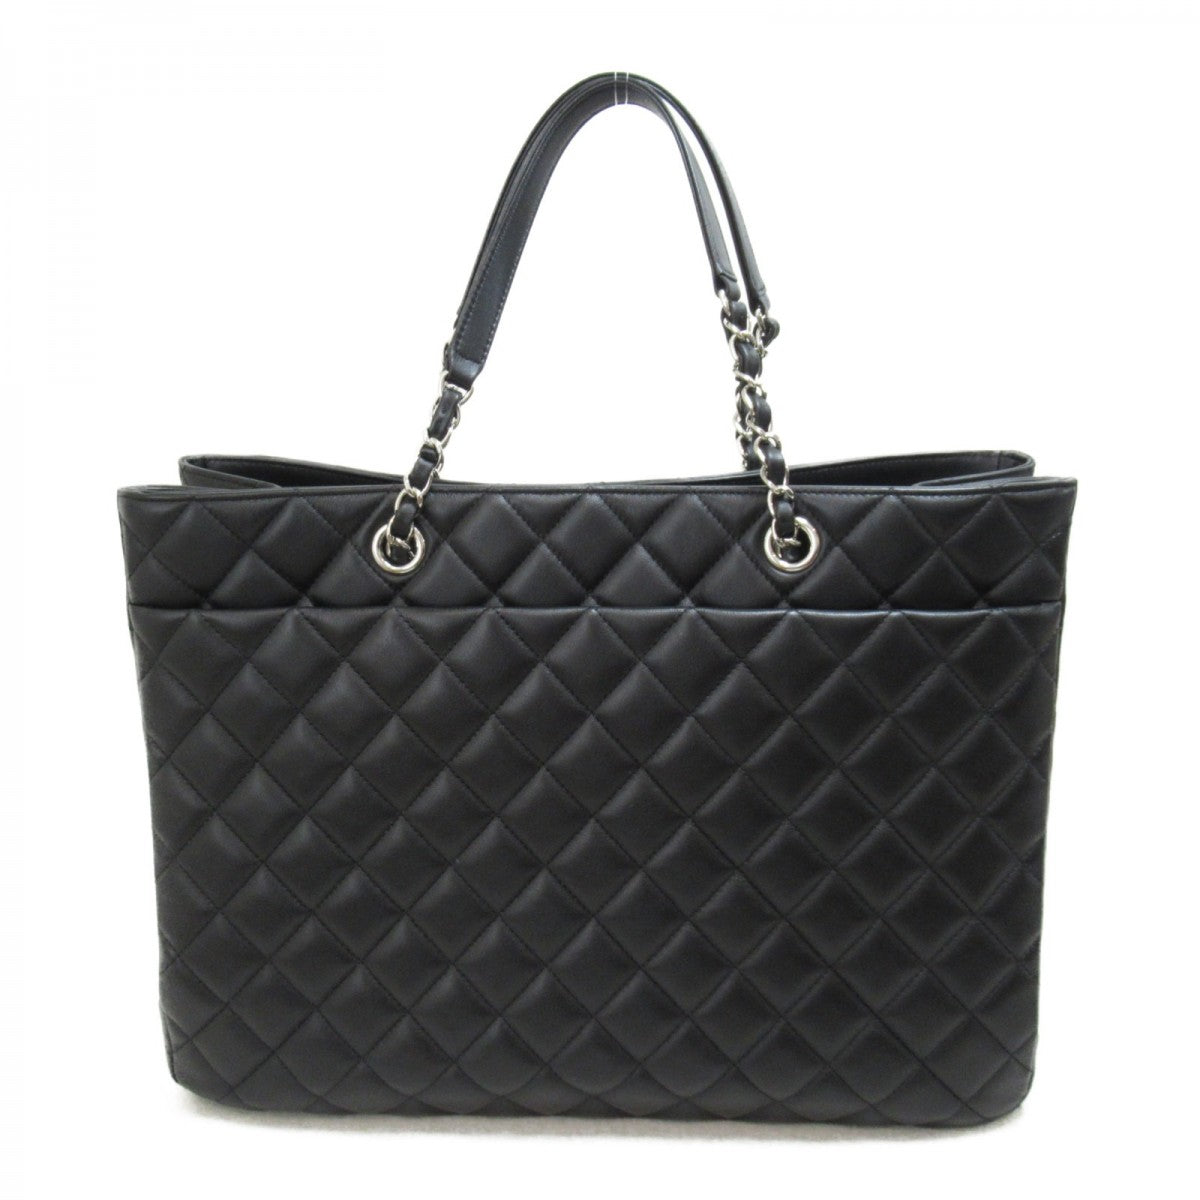 CC Quilted Leather Chain Tote Bag A91046